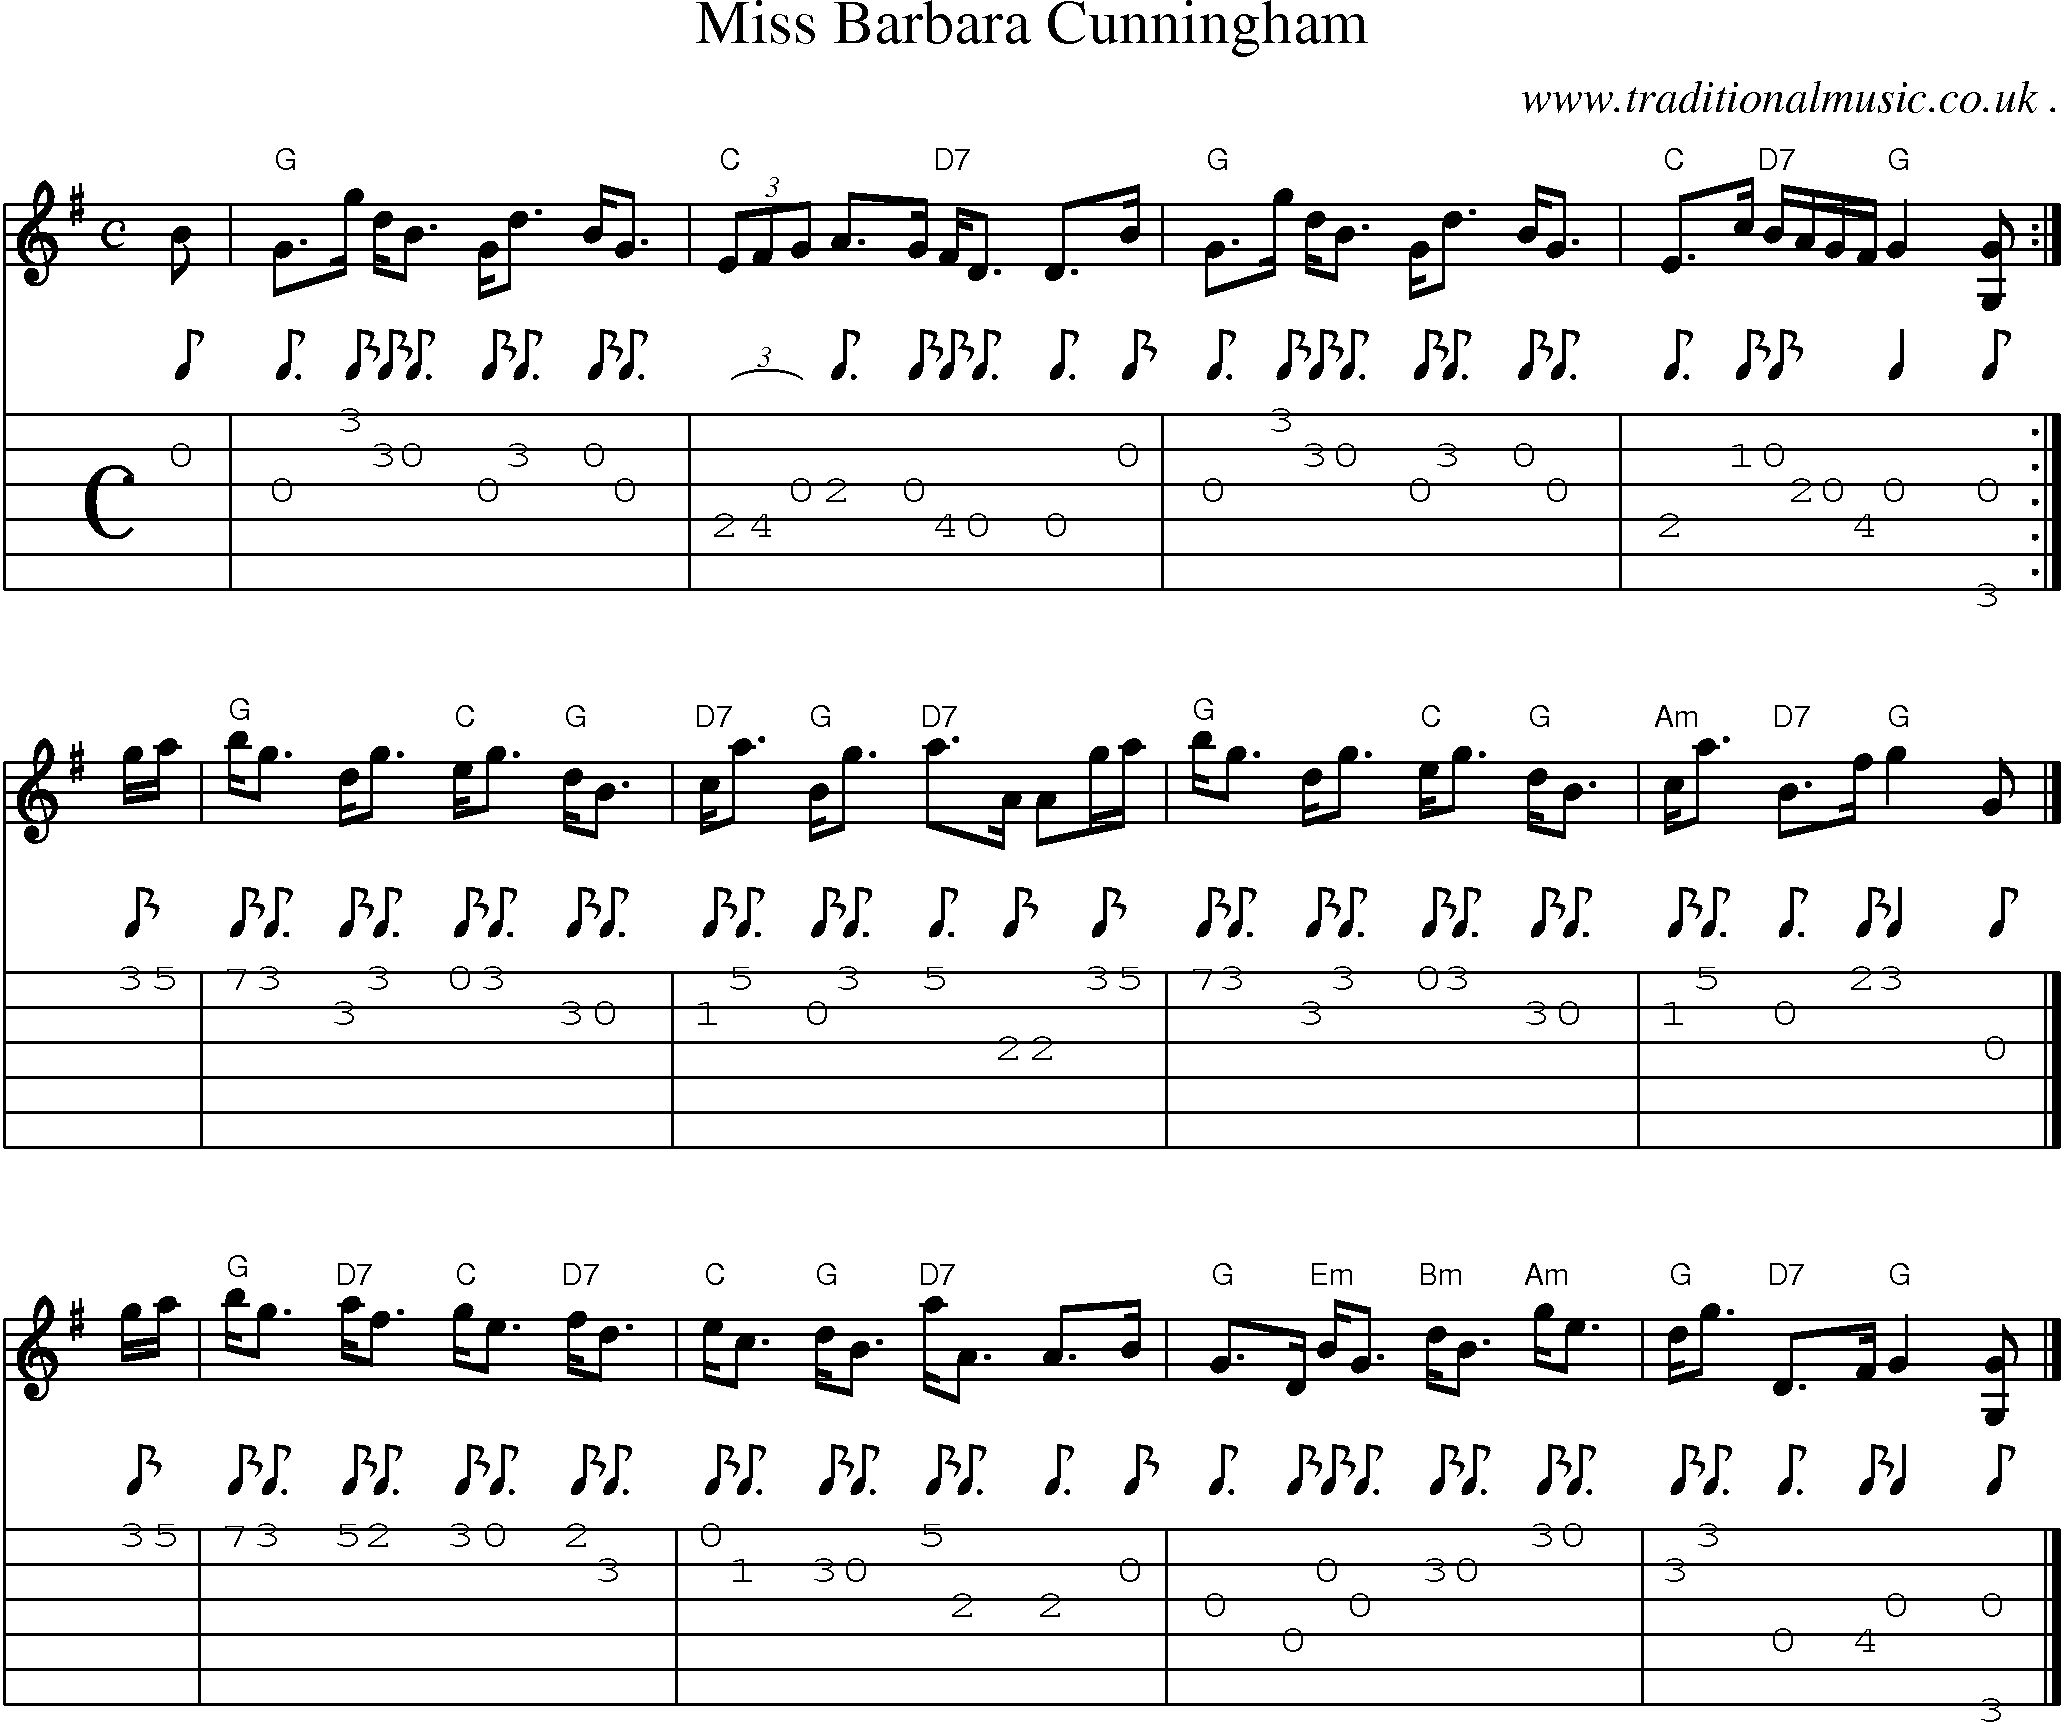 Sheet-music  score, Chords and Guitar Tabs for Miss Barbara Cunningham